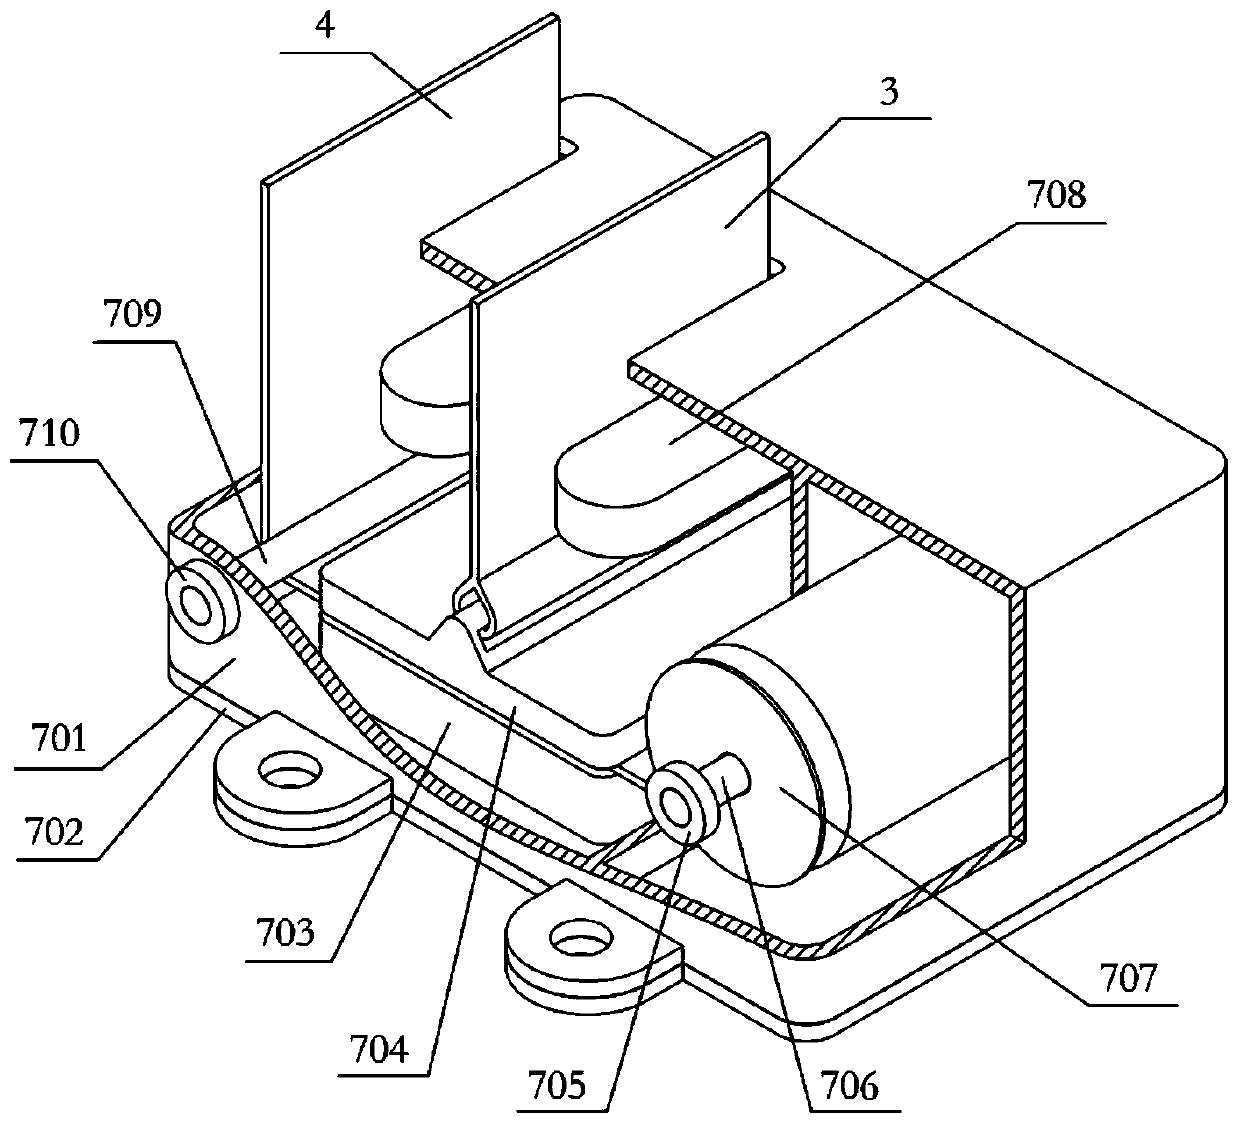 Automatic control device used in expanding process of air bag restraint system